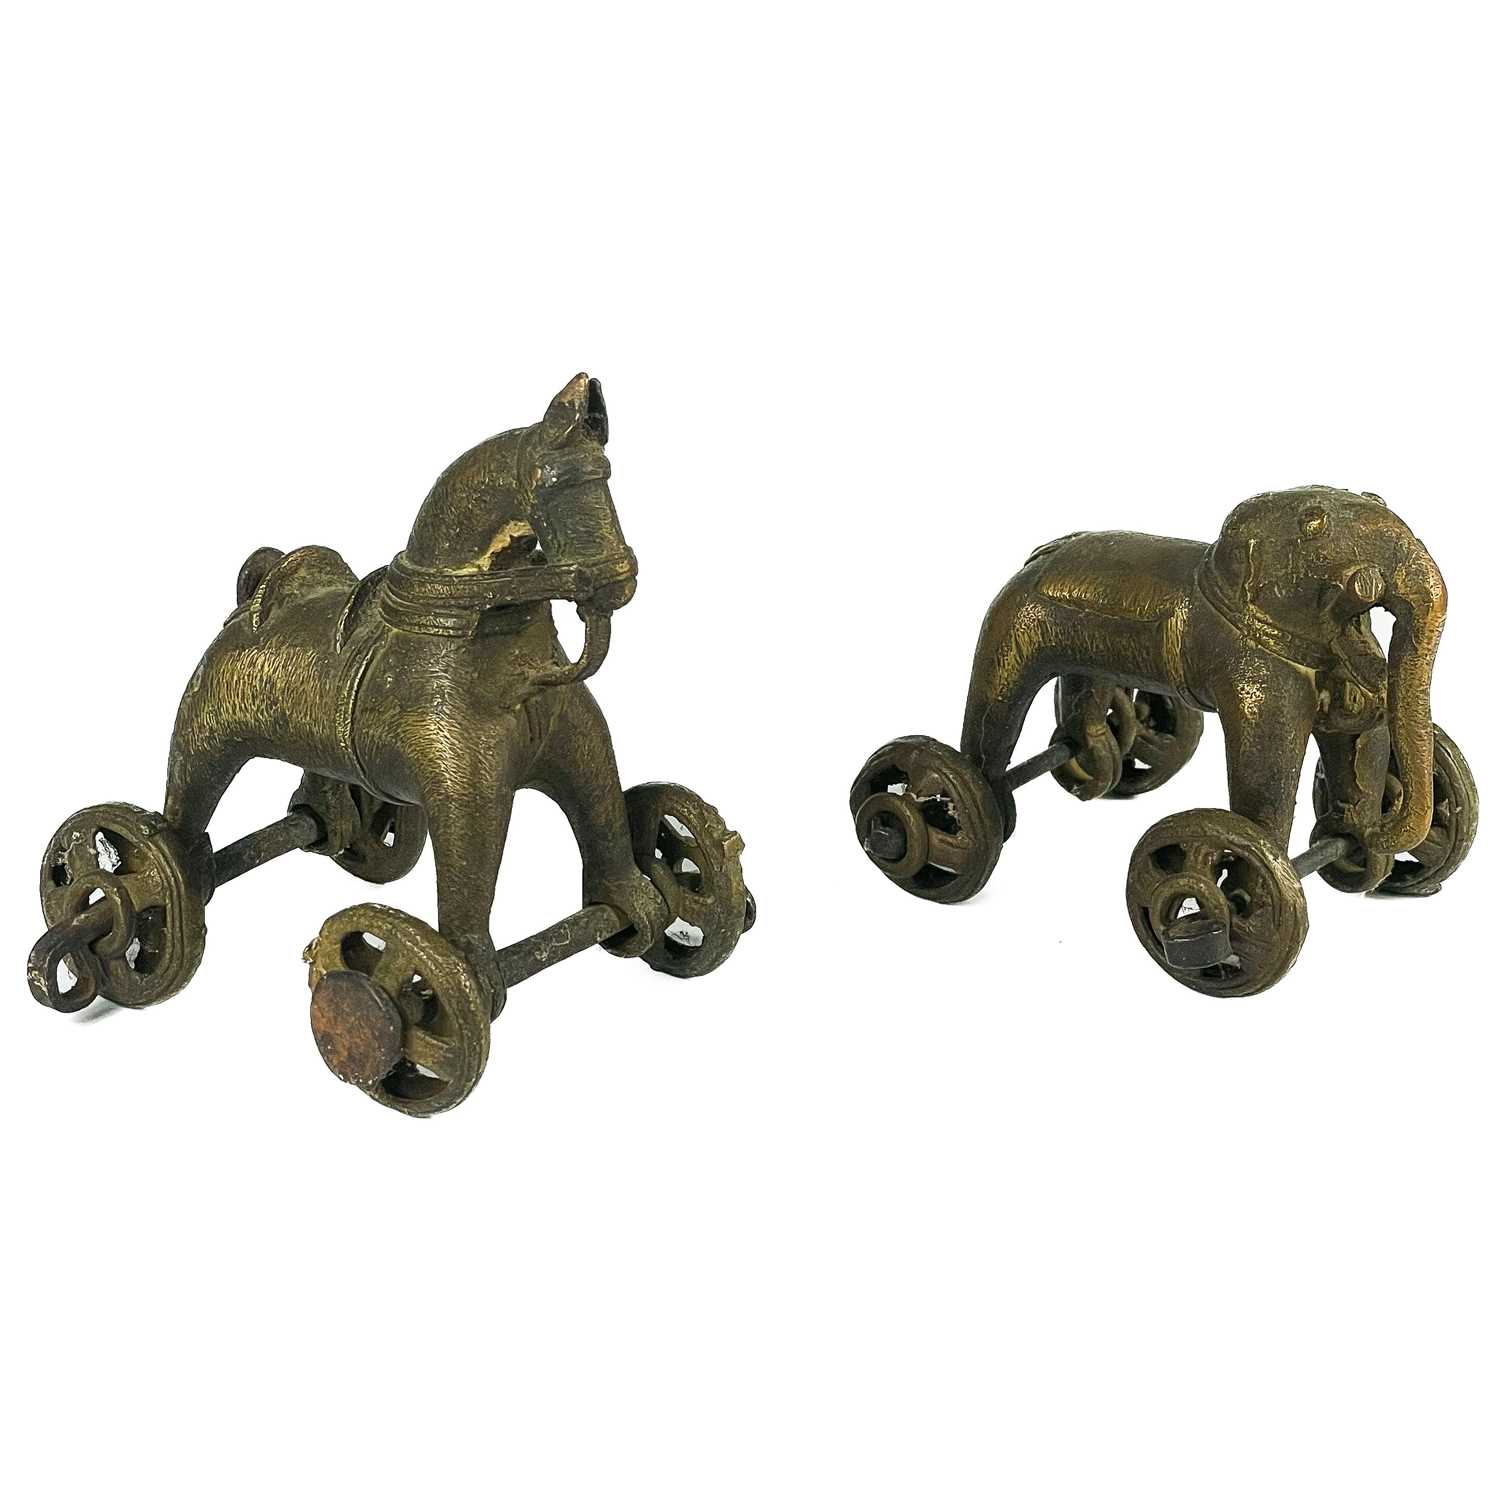 Two Indian bronze temple toys, circa 1900. - Image 3 of 4